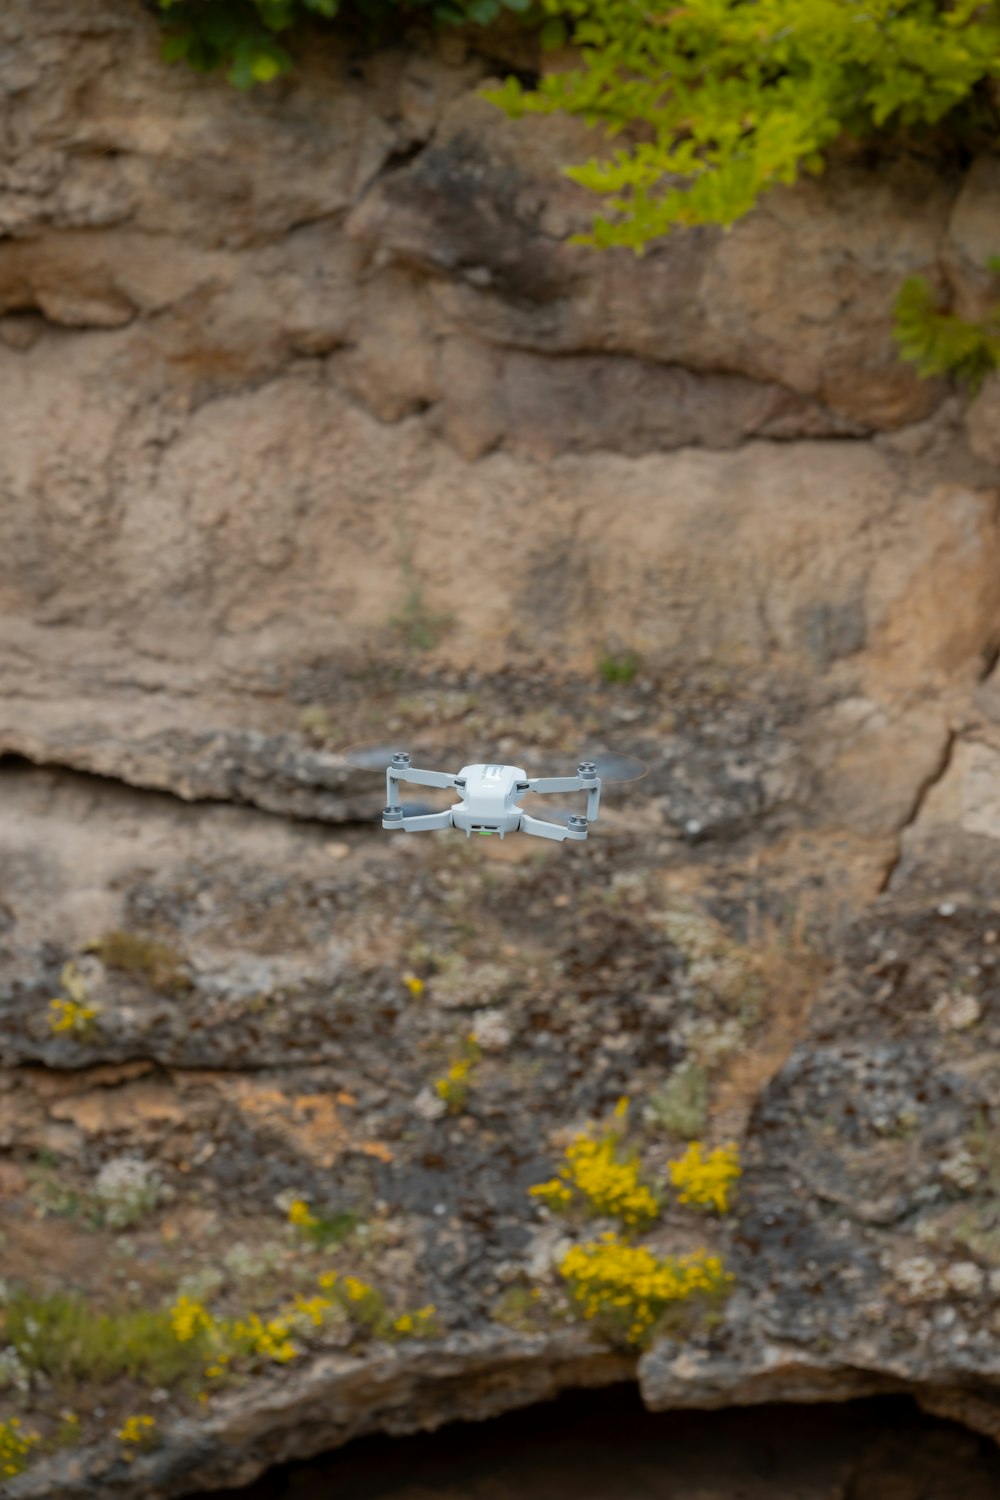 a small white object flying over a rocky cliff